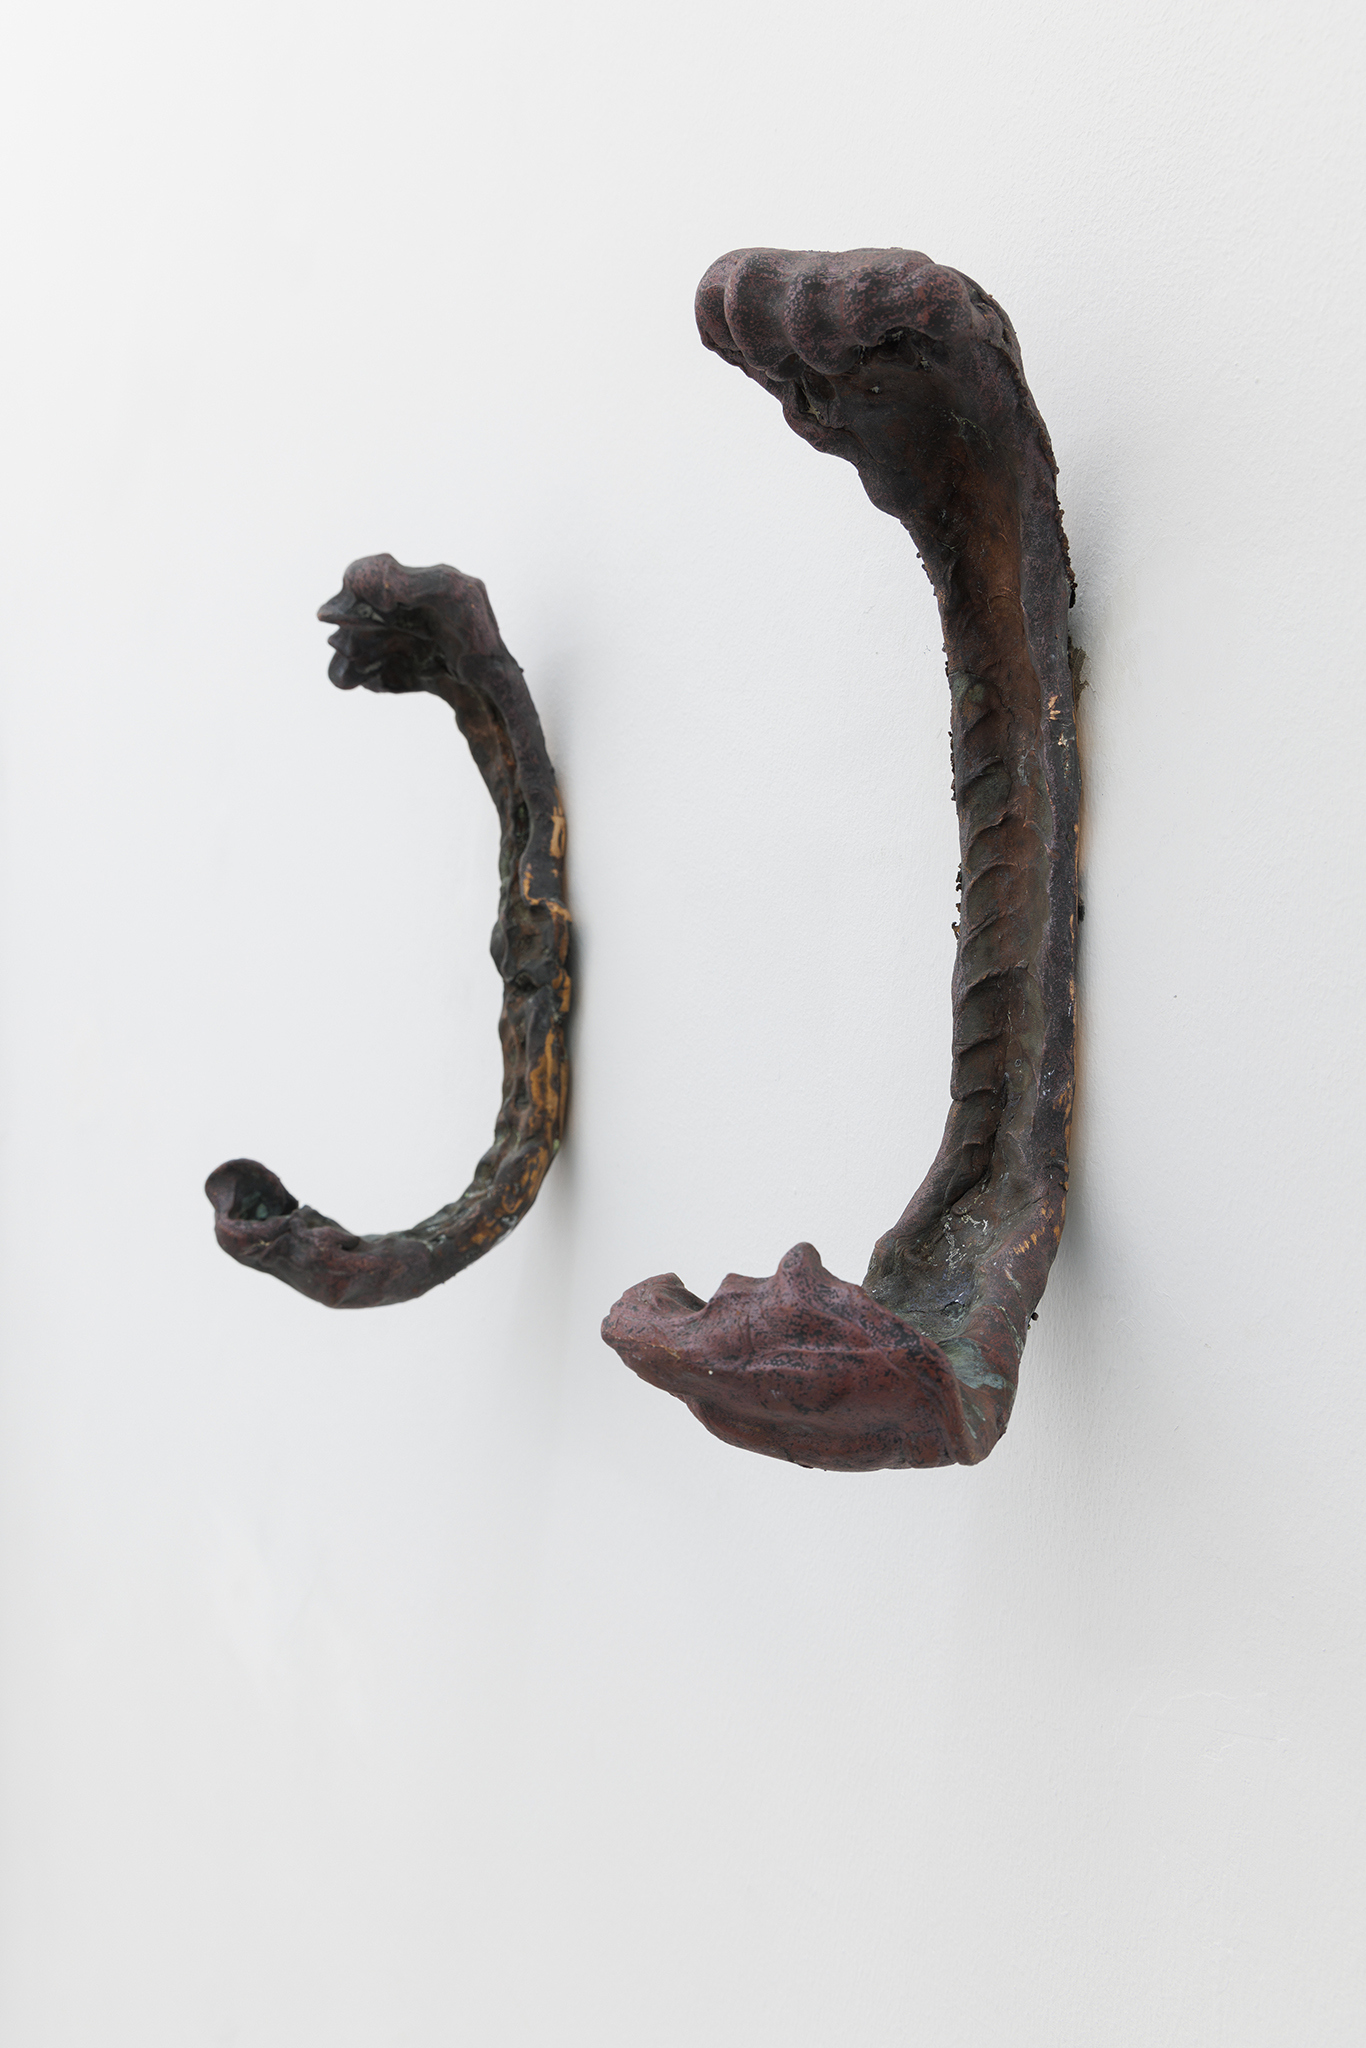 Kay Yoon, Defleshed, 2023, bronze, two-part work, Left: 35 x 10 x 11 cm, Right: 35 x 13 x 15 cm